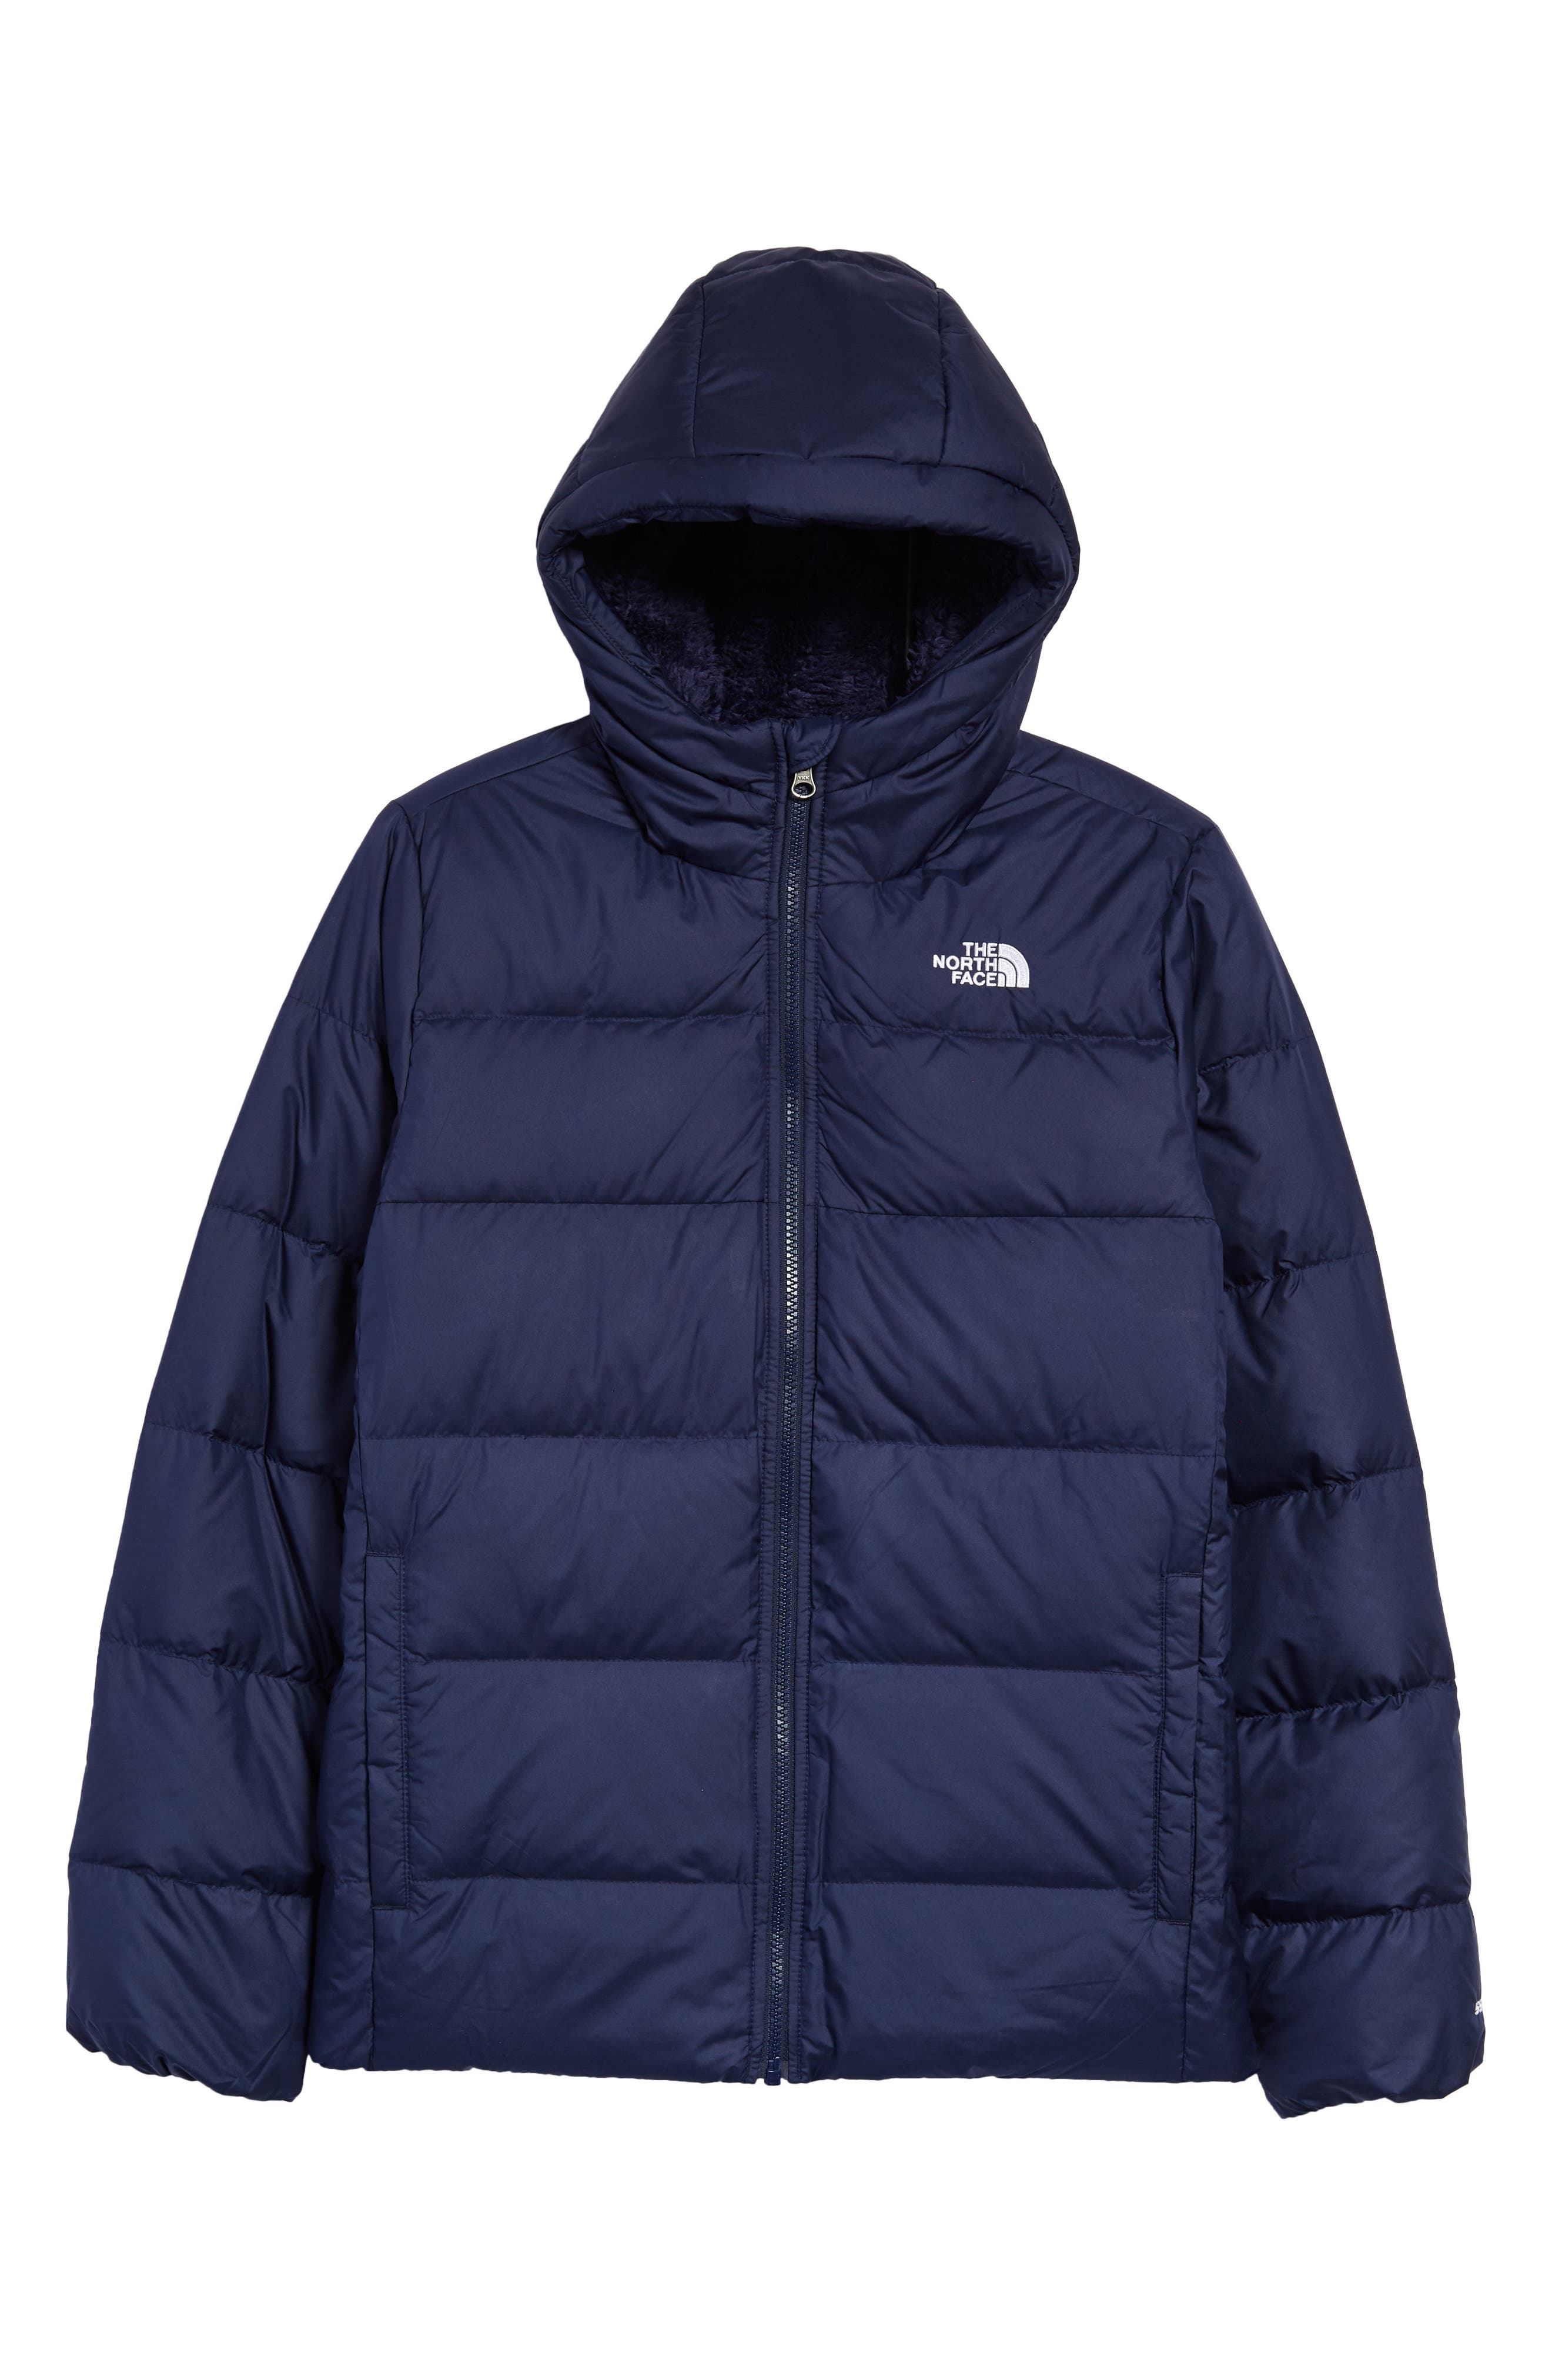 north face toddler clothes